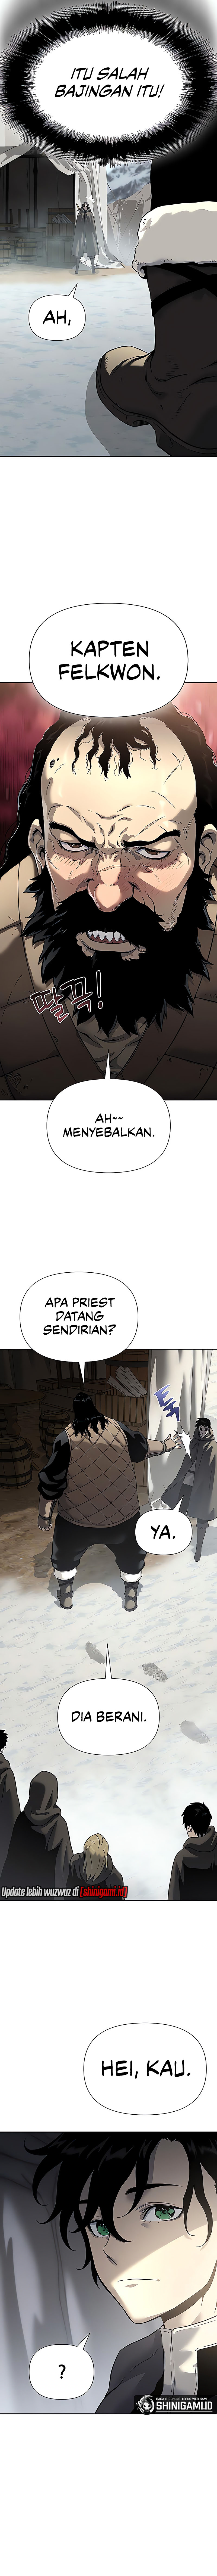 the-priest-of-corruption Chapter 18